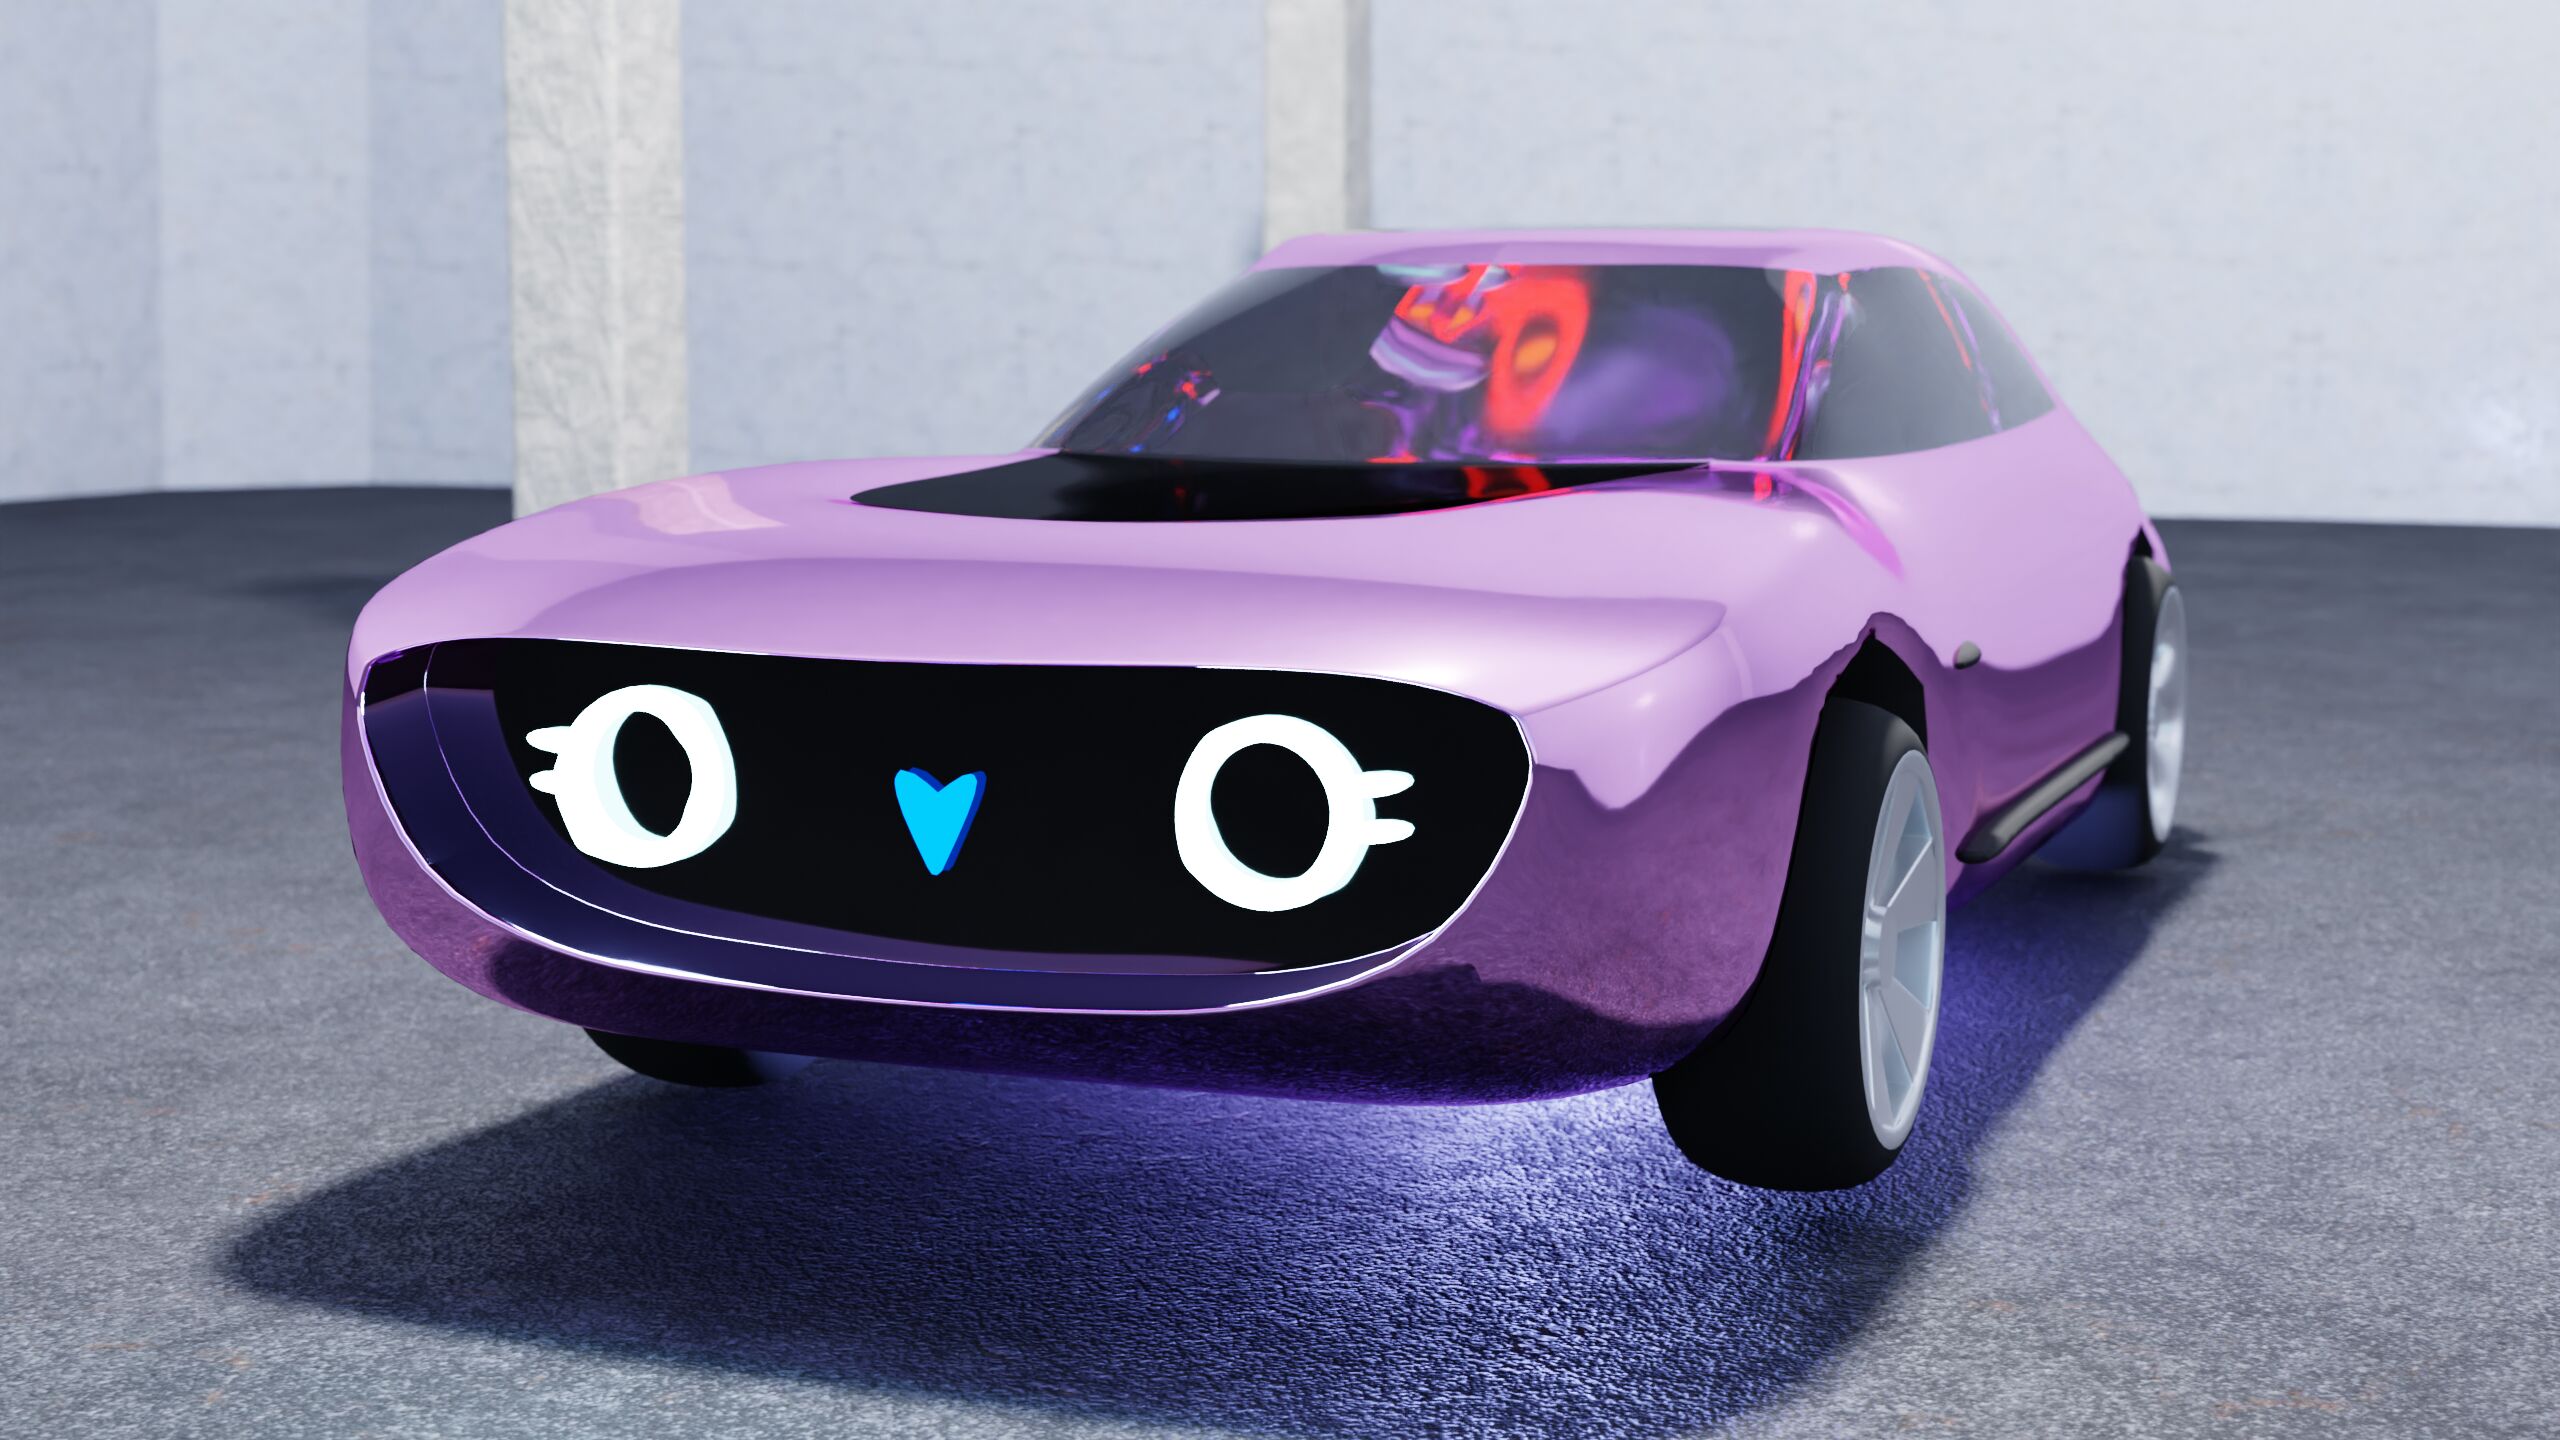 A futuristic electric sports car with light-pink glossy paint and some black surfaces. It is parked on an asphalt floor with white marble walls around it in the background. There are also some white marble pillars on the floor behind the car. The car is making a shadow in the bright white overhead light but the asphalt directly under the car is being lit brightly. The nose of the car has two headlights in the shape of a circle with two eye lids to the side. The nose also incorporates a blue glowing arrow in the middles, pointing down.